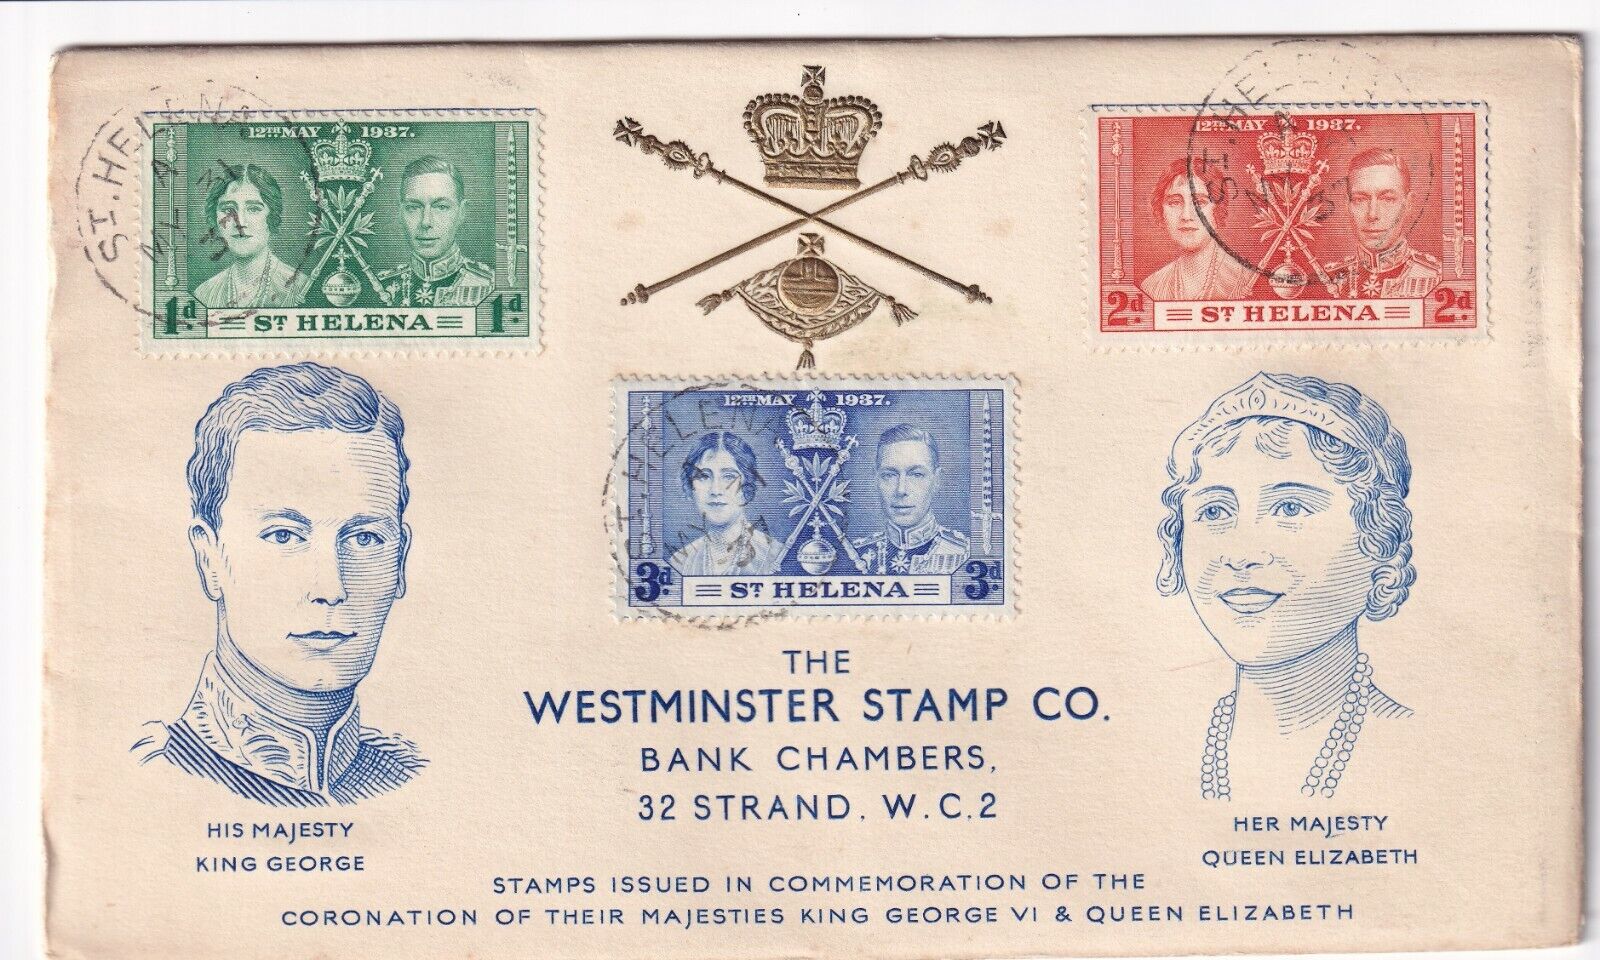 ST HELENA 1937 CORONATION OF KGVI ON illustrated cover